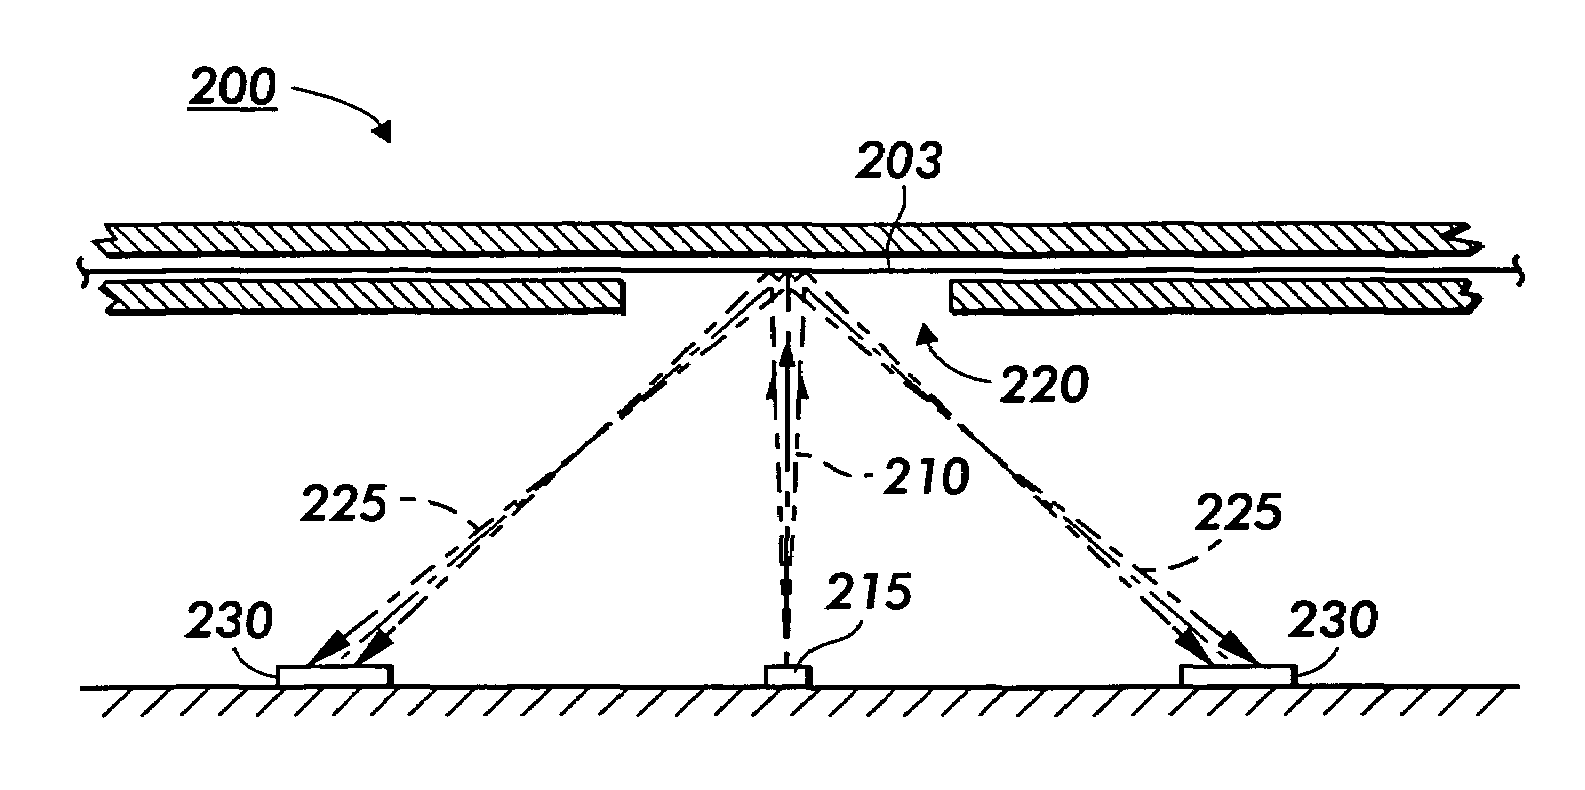 Methods for automated uniformity assessment and modification of image non-uniformities